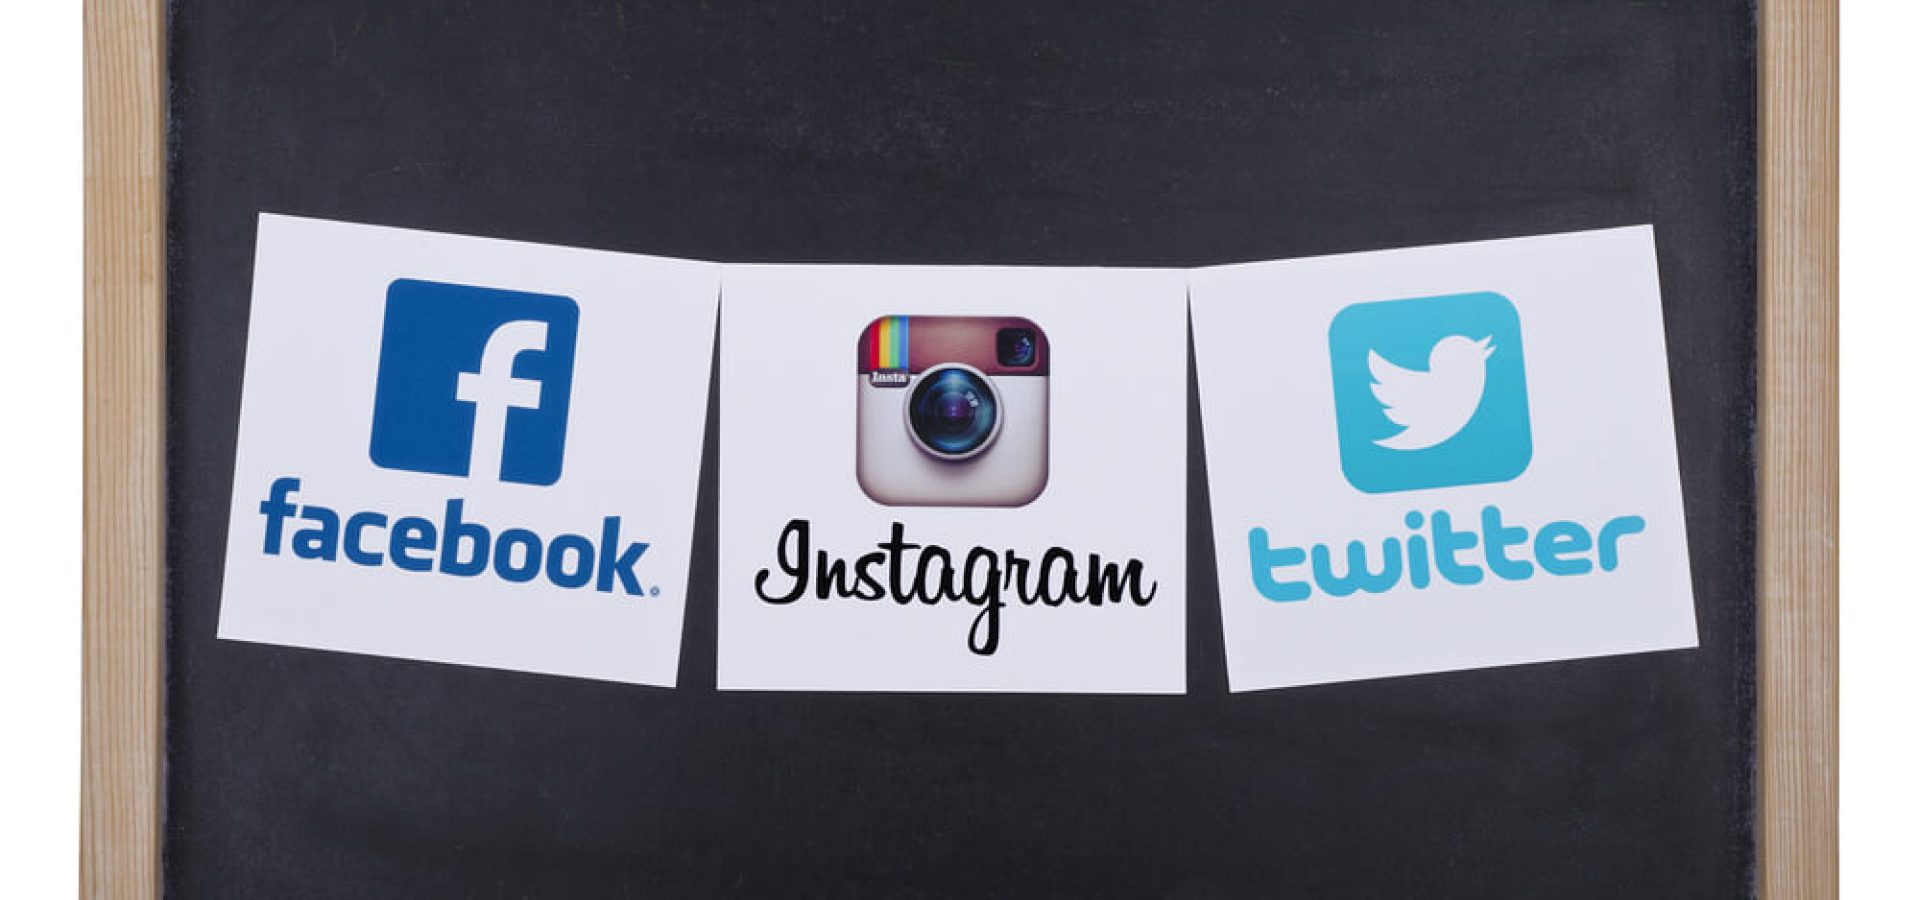 Facebook, Twitter; Instagram logos printed on paper and placed on a blackboard.